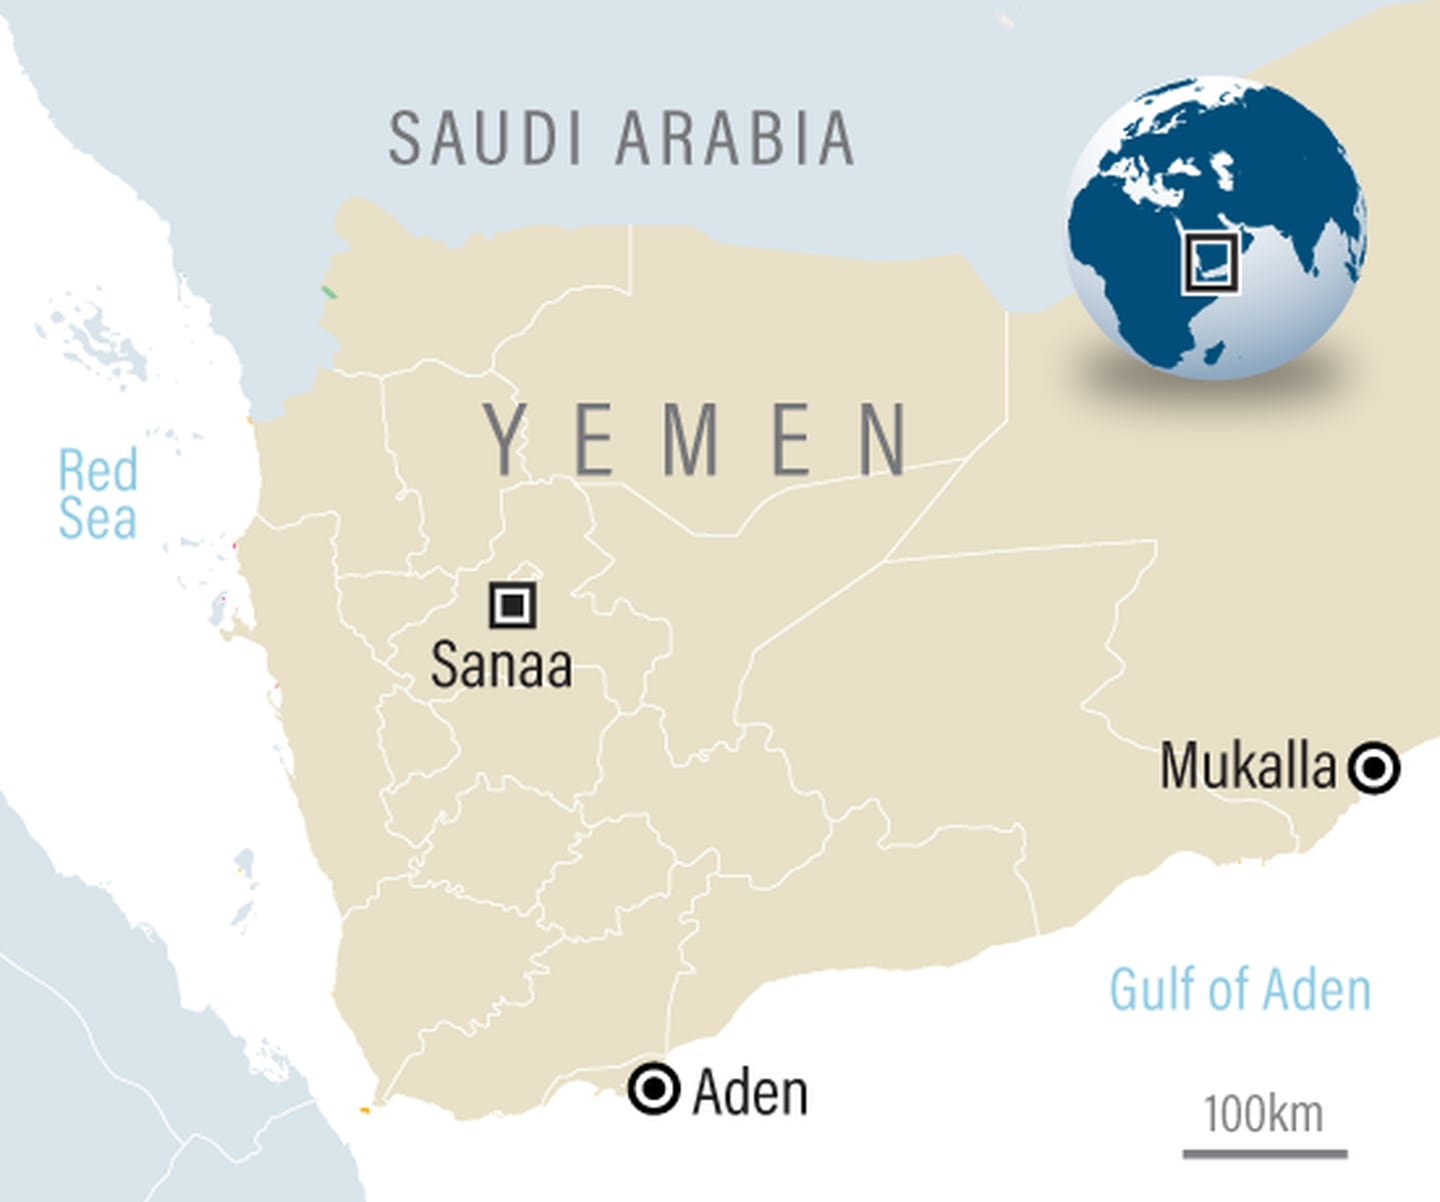 The attack happened near the Yemeni city of Mukalla, about 585 kilometers east of the rebel-held capital of Sanaa.